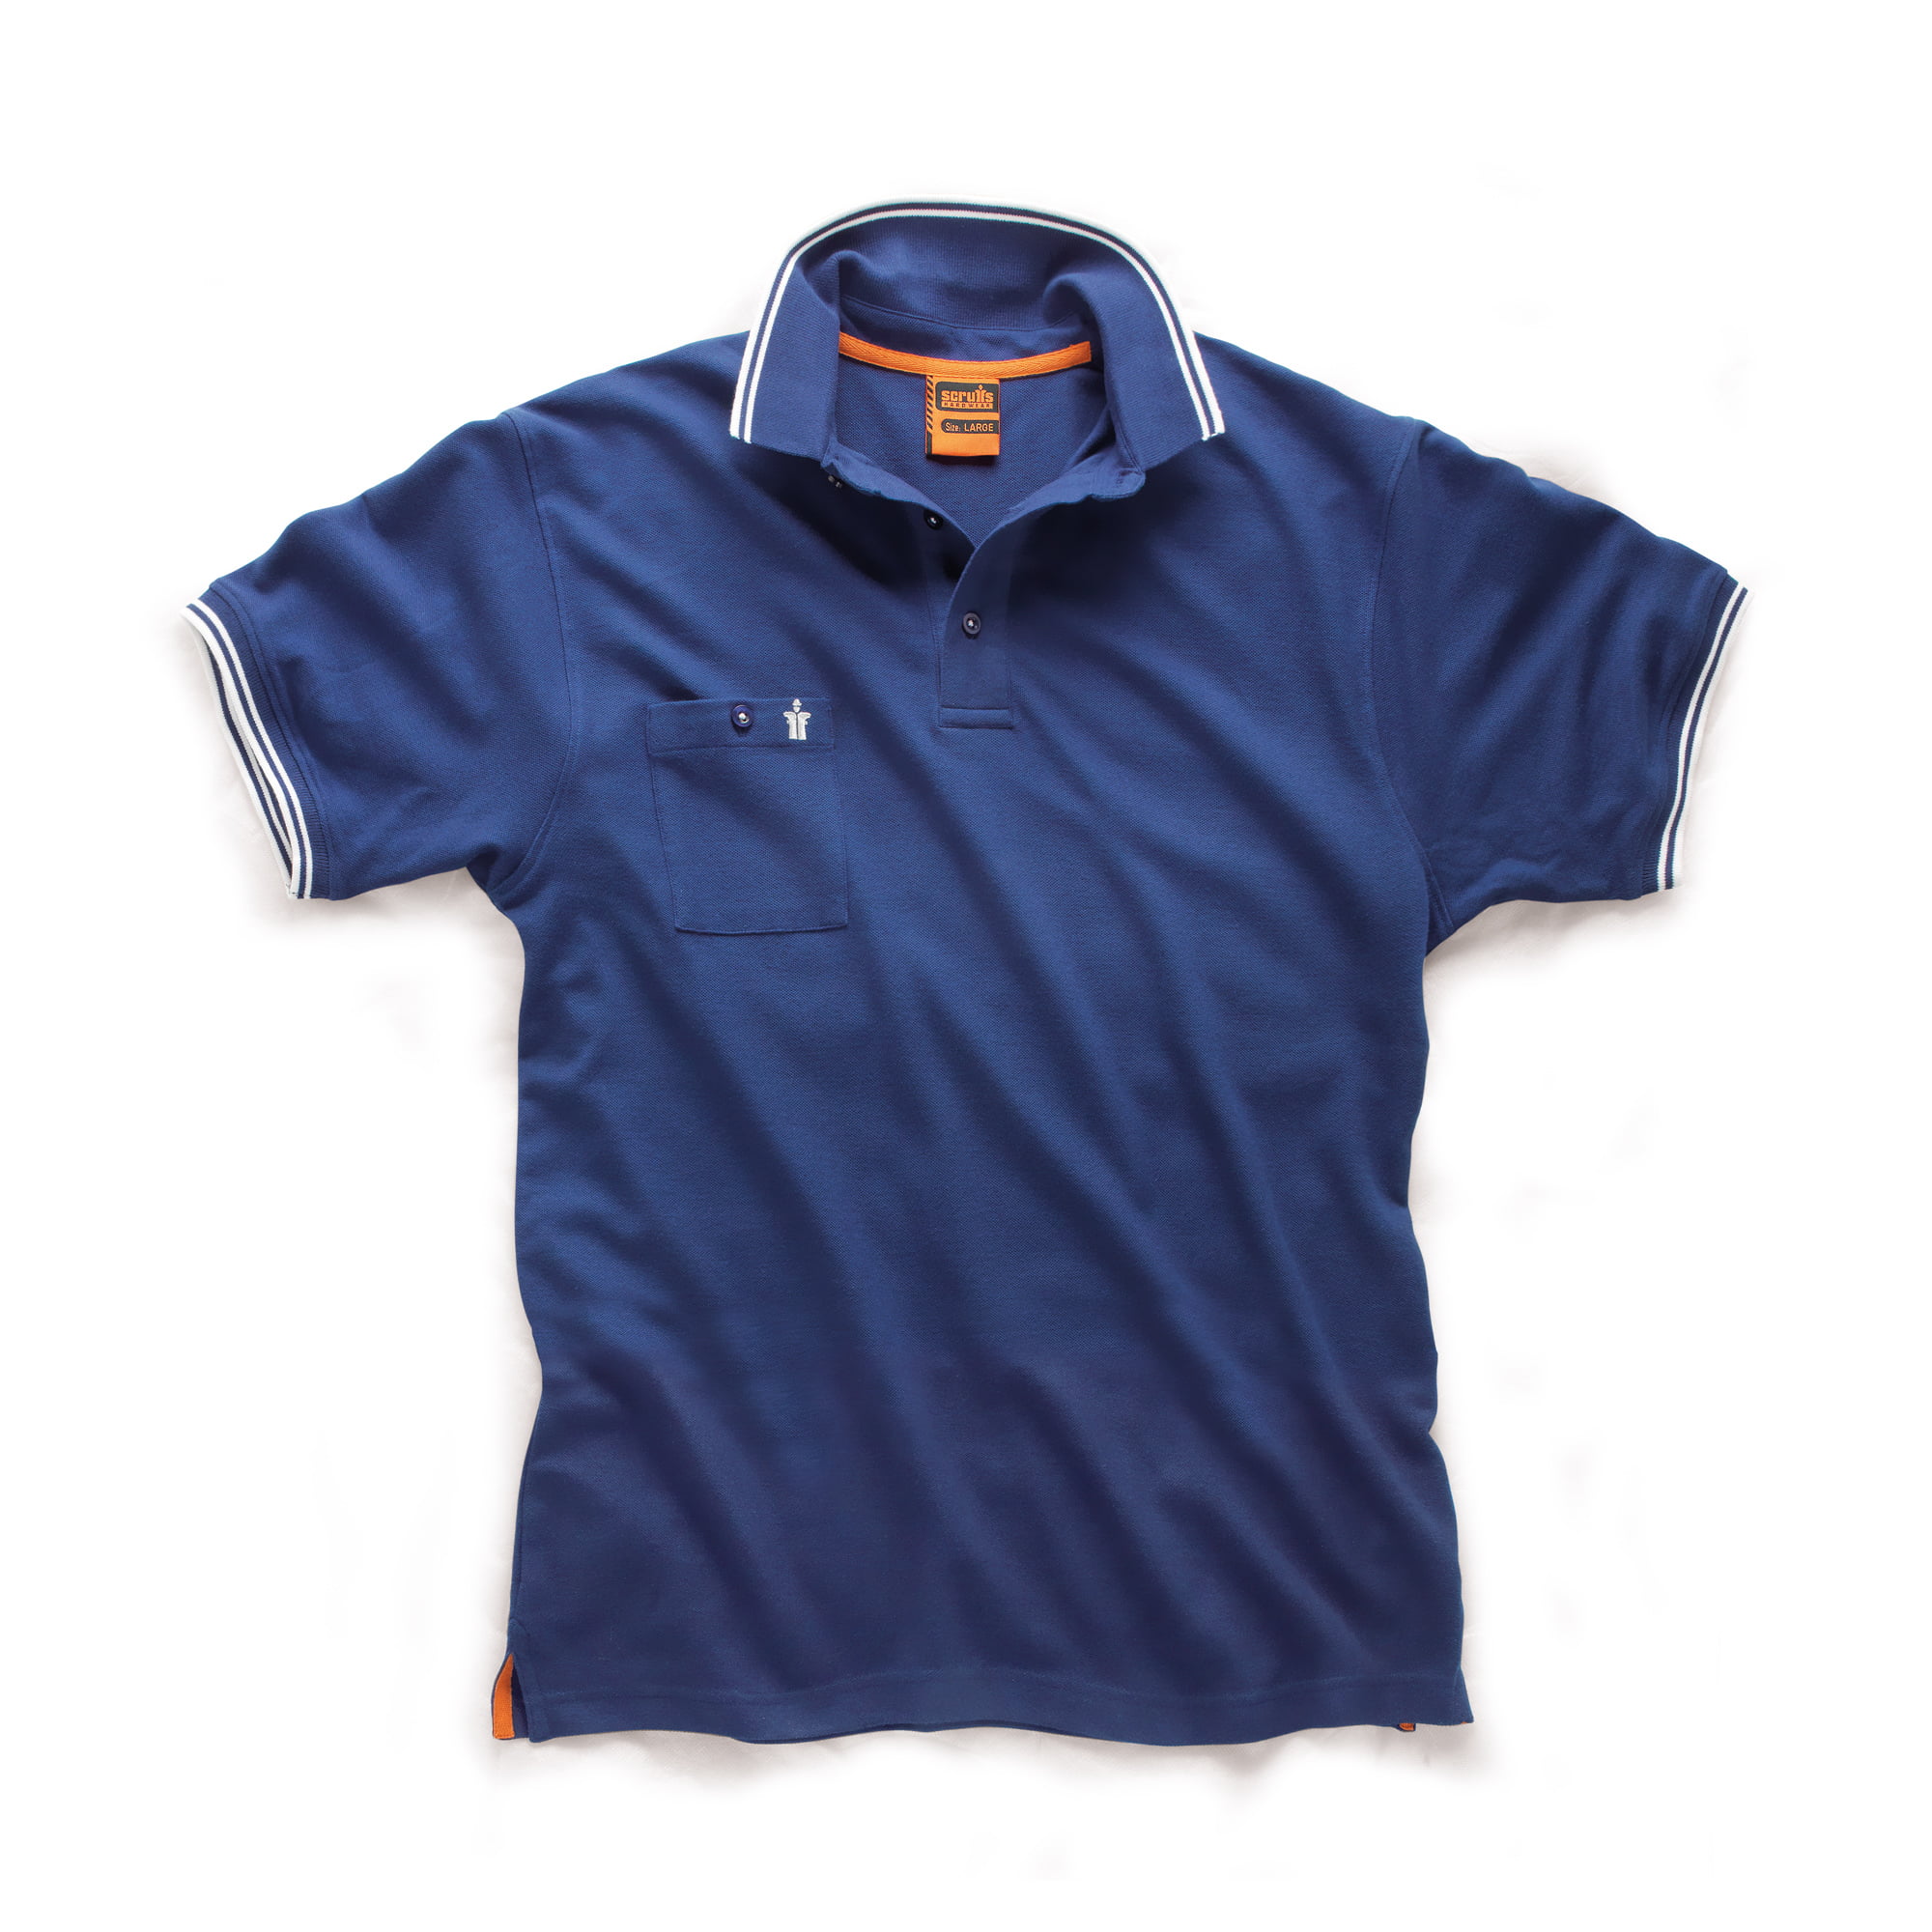 Scruffs dark blue polo with white detailing on the sleeves and collar